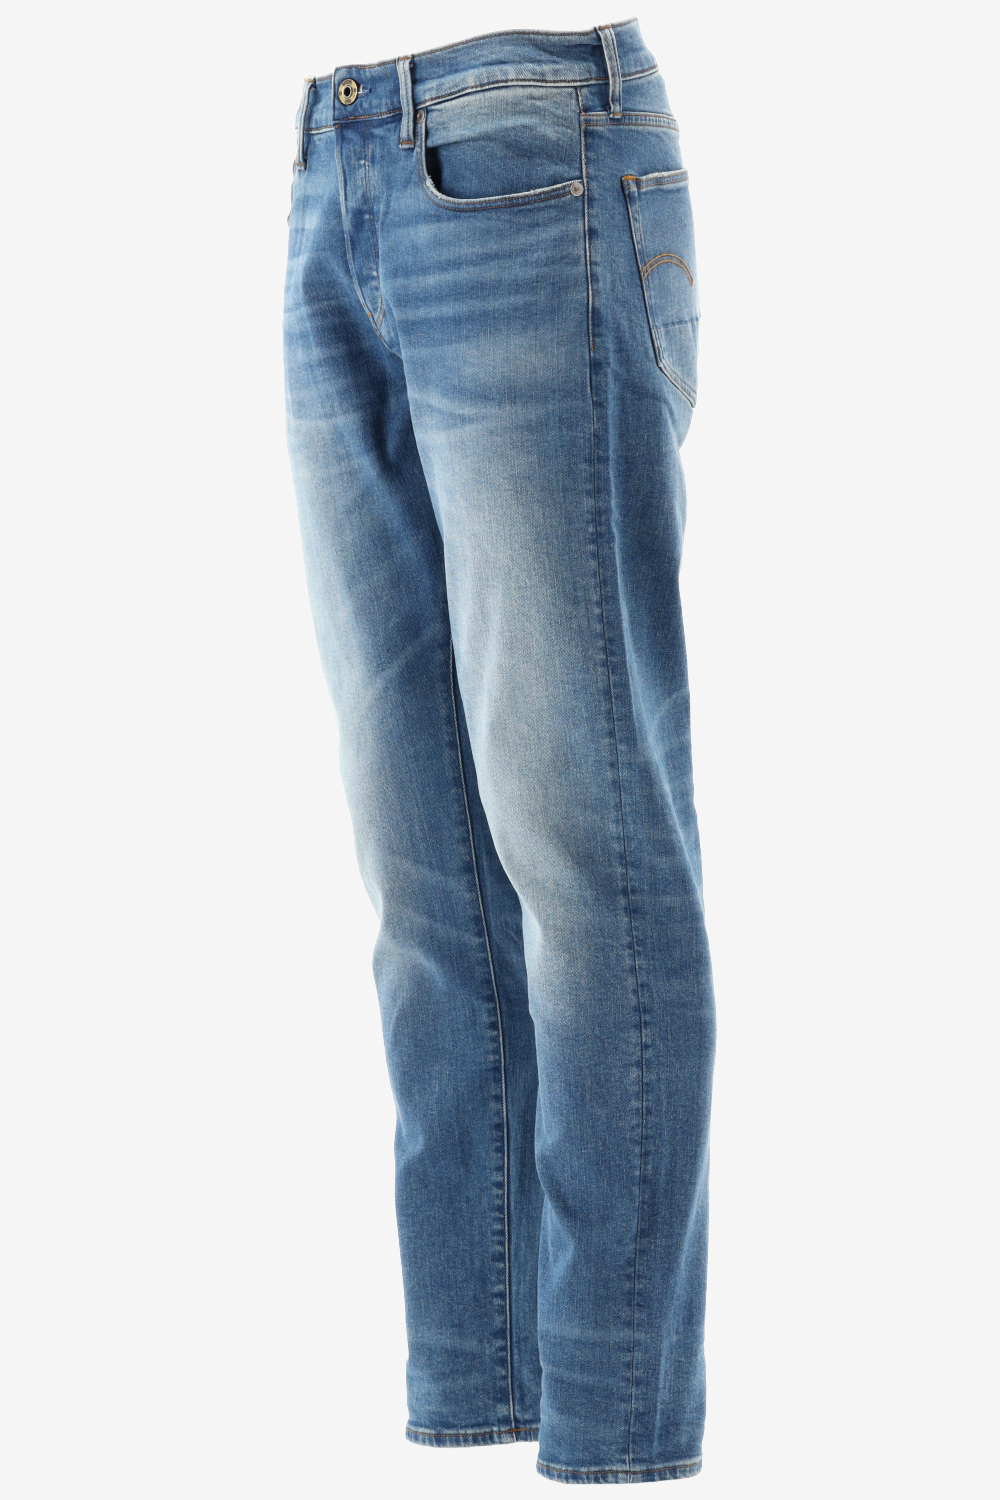 G-Star Tapered Fit 3301 REGULAR TAPERED JEANS